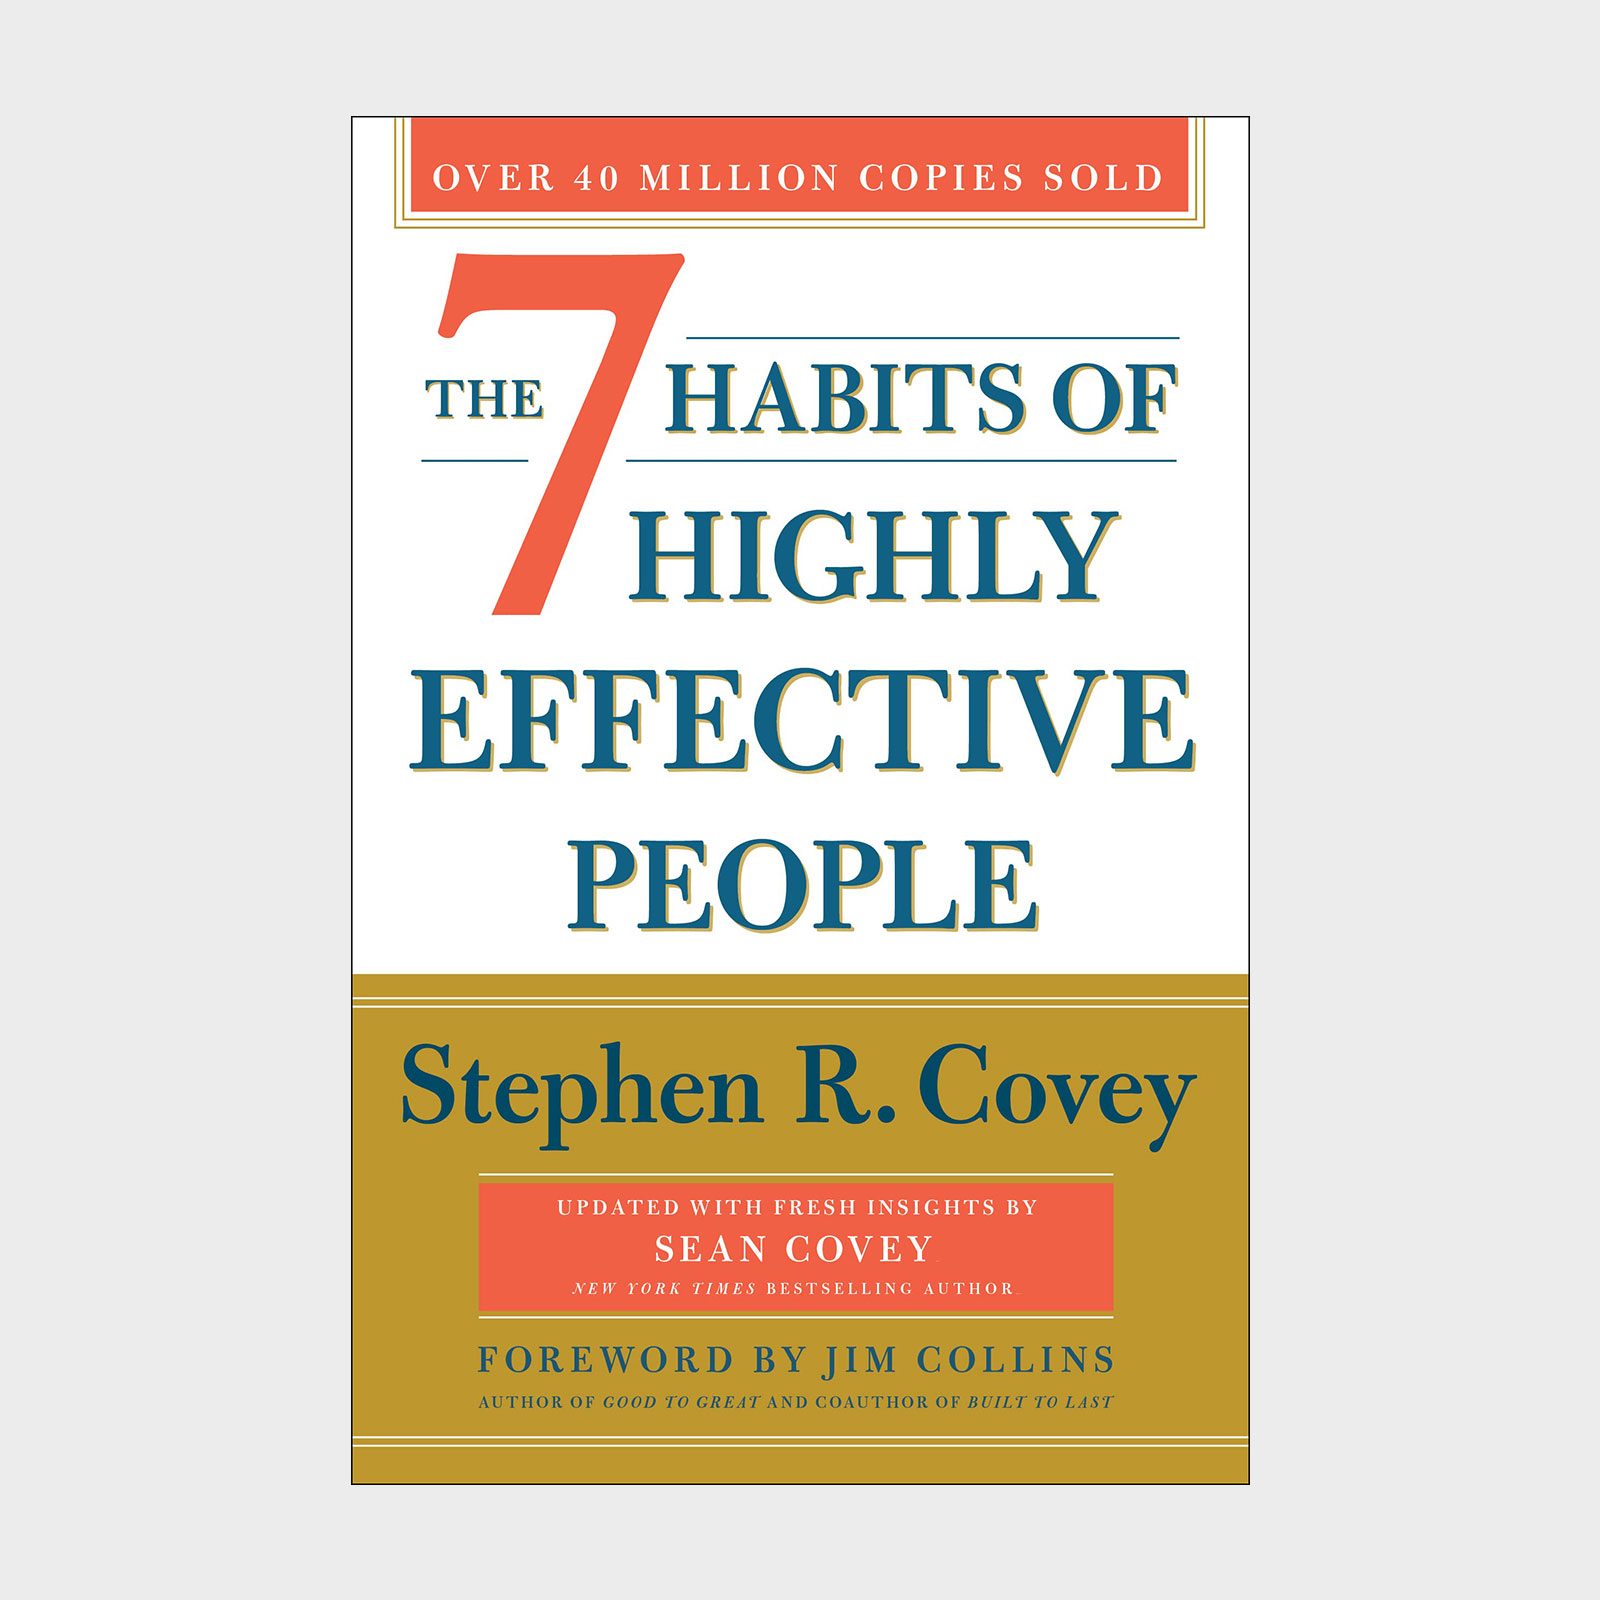 <p>More than 30 years after its release, this highly acclaimed book (read by presidents and parents alike) is still giving high-achievers and leaders around the world the tools they need to live effective lives. <a href="https://www.amazon.com/Habits-Highly-Effective-People-Powerful/dp/1982137274" rel="noopener"><em>The 7 Habits of Highly Effective People</em></a> has become one of the most popular inspirational books of all time for its description of seven incredibly successful habits and Stephen Covey's principle-centered approach to time management and problem solving in personal and professional settings.</p> <p class="listicle-page__cta-button-shop"><a class="shop-btn" href="https://www.amazon.com/Habits-Highly-Effective-People-Powerful/dp/1982137274/">Shop Now</a></p>